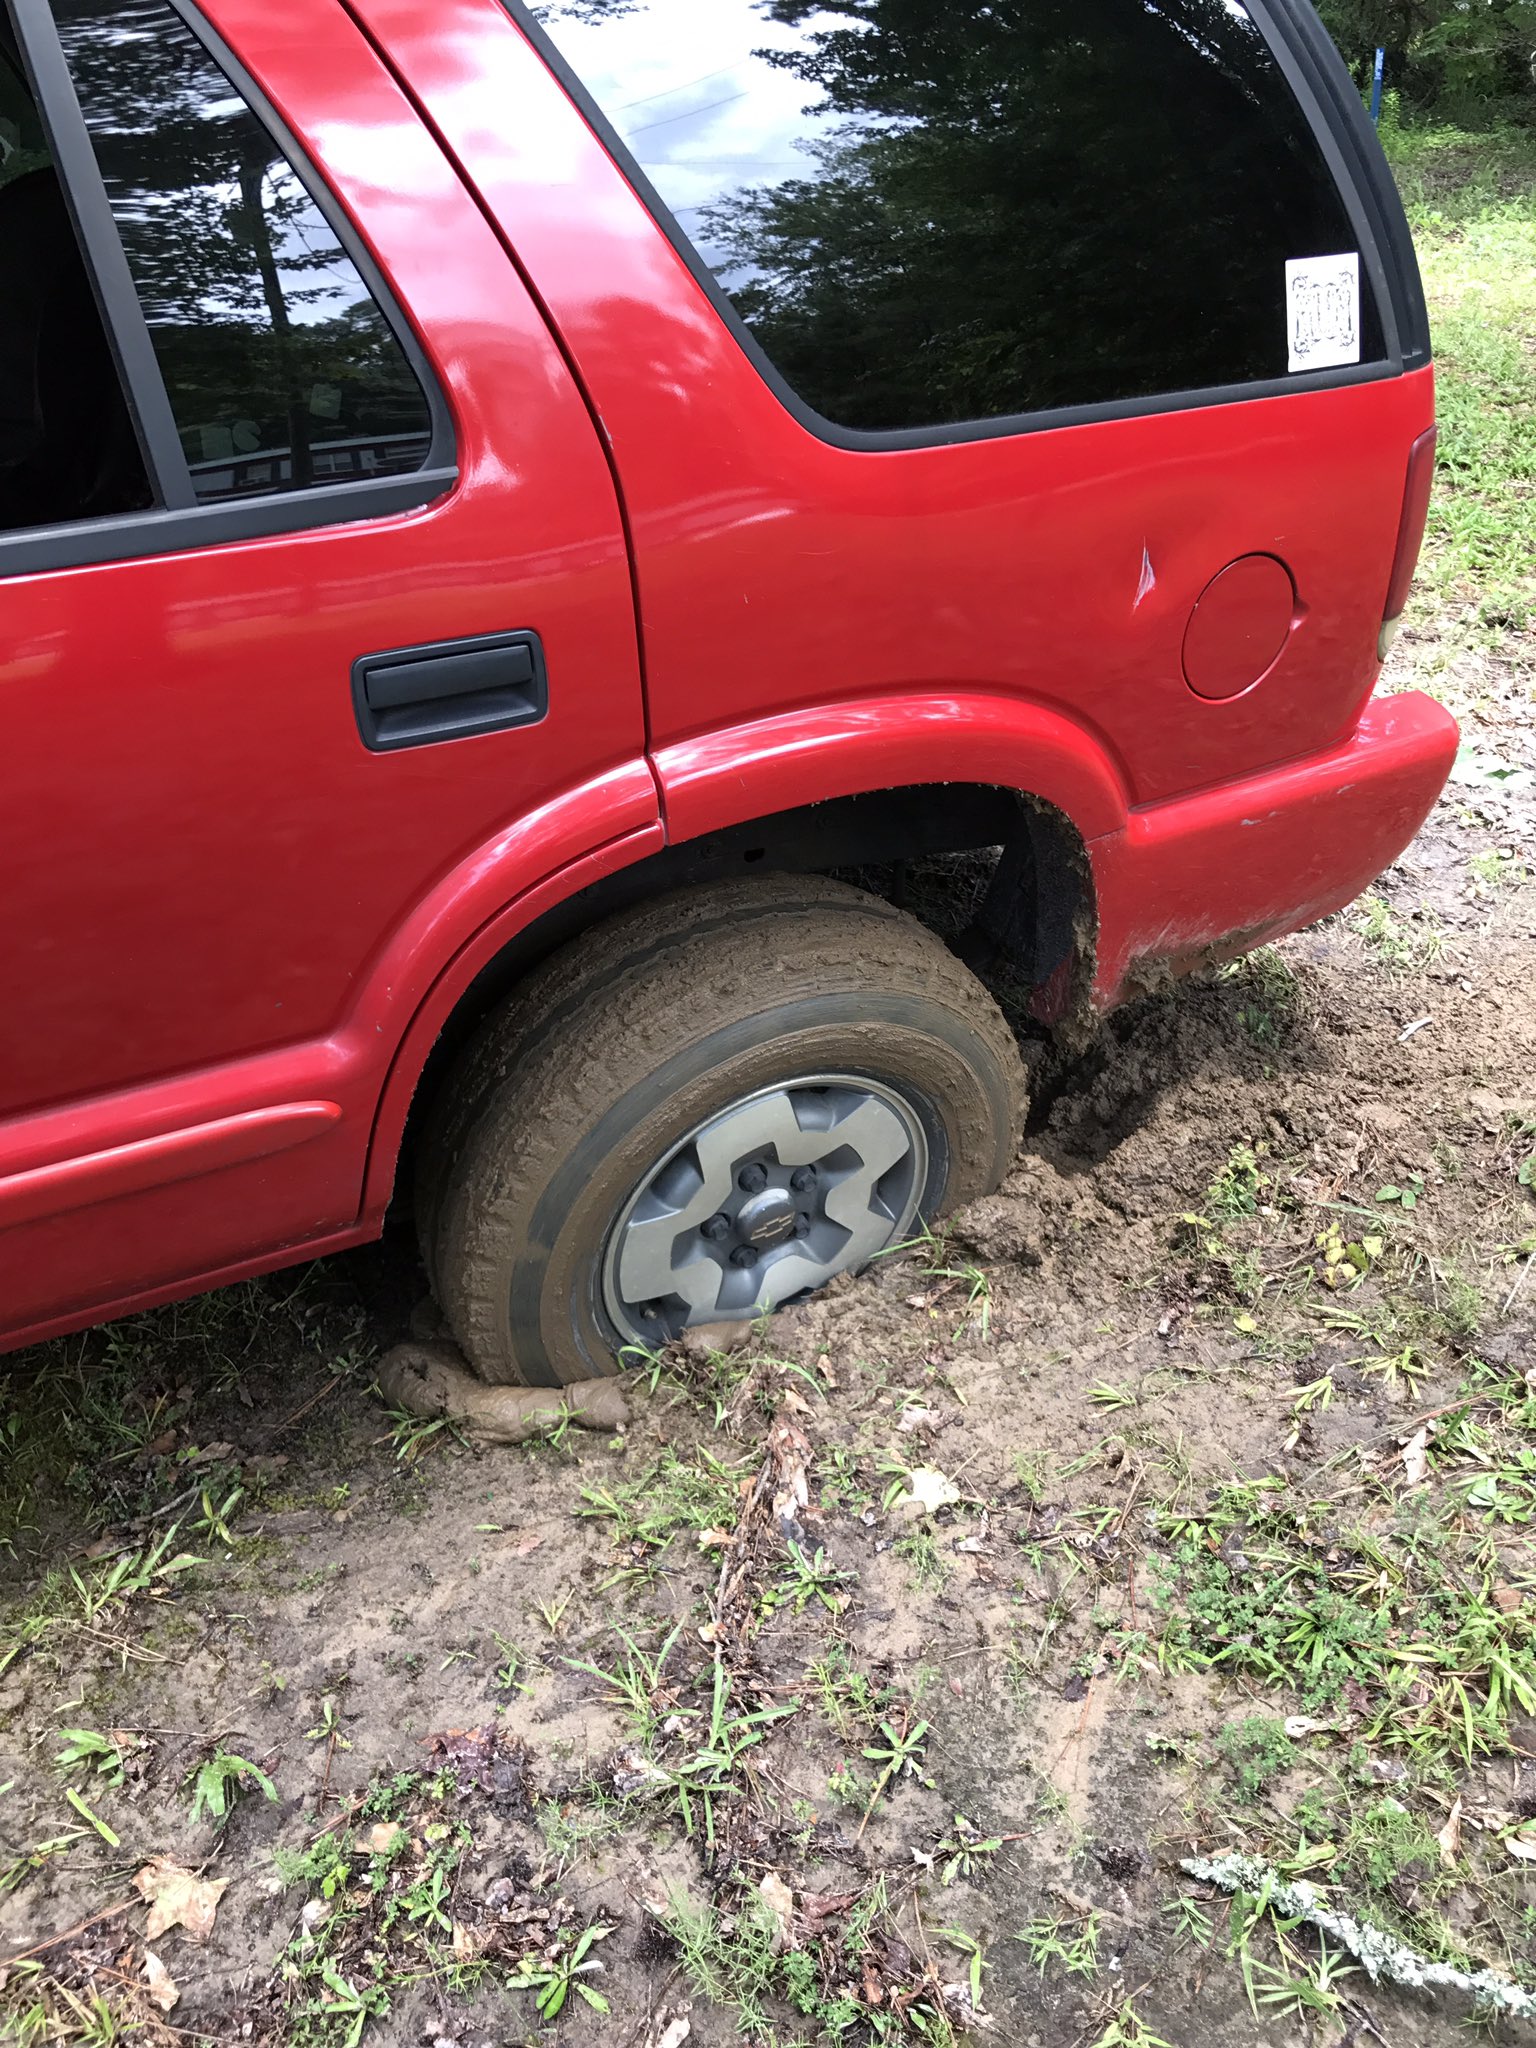 cyndi-on-twitter-i-got-my-truck-stuck-in-the-mud-we-tried-to-use-the